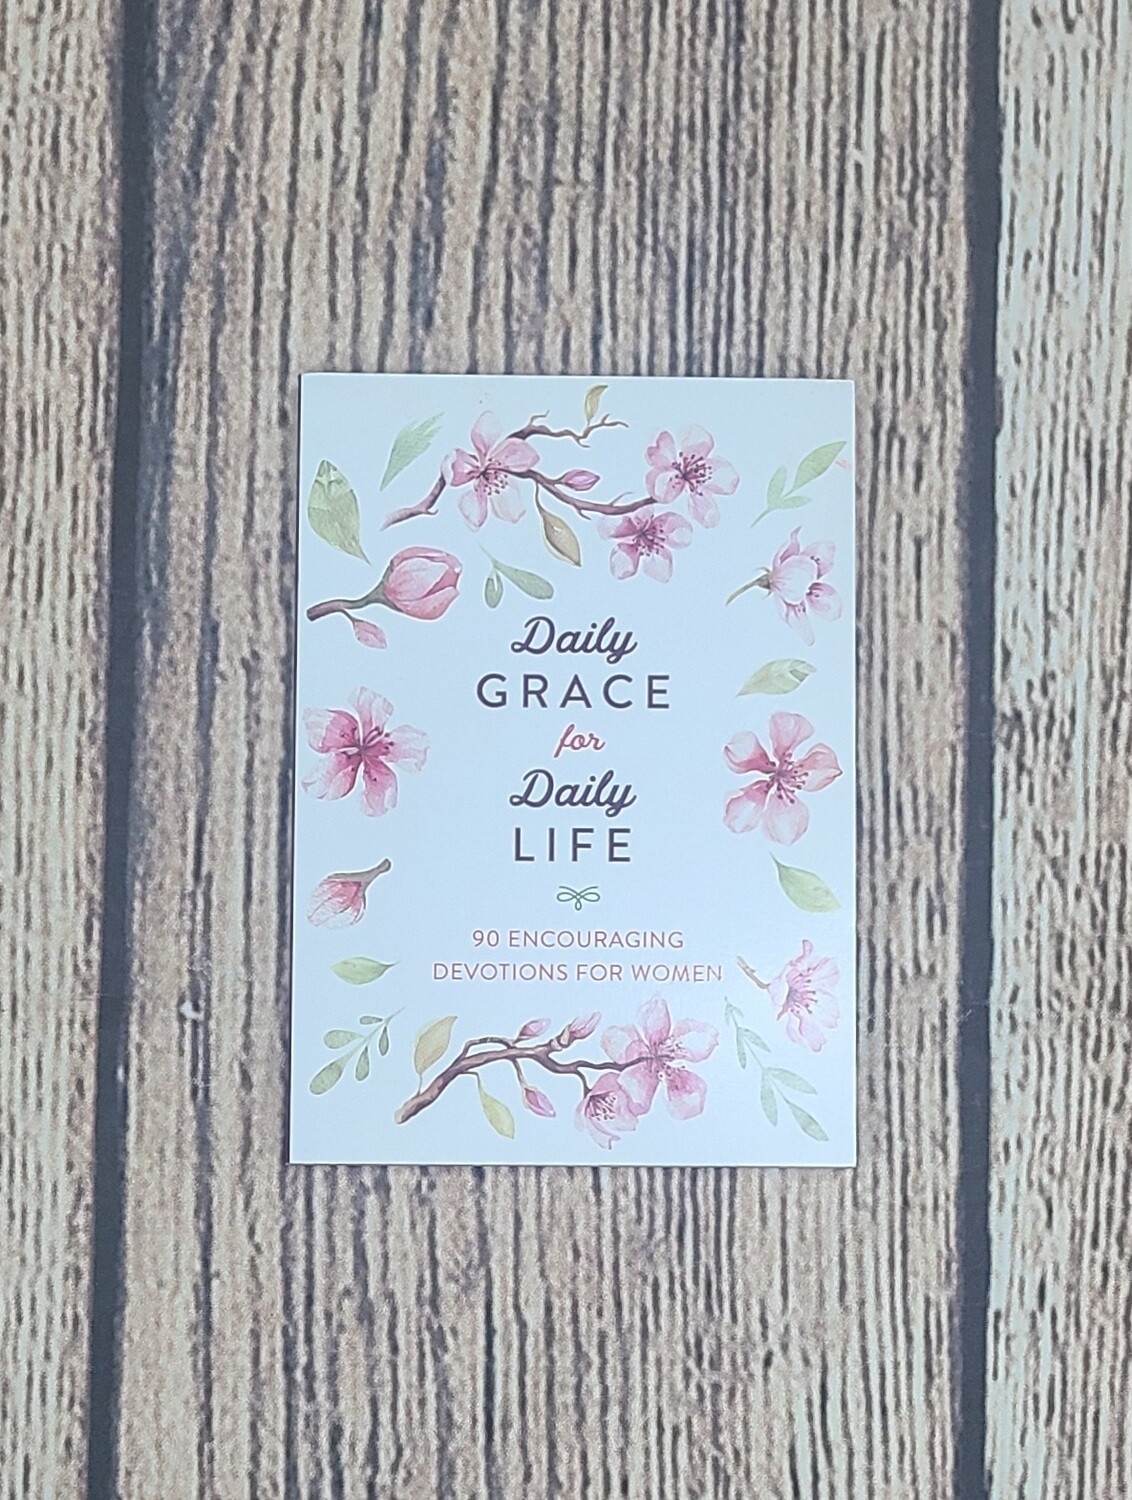 Daily Grace for Daily Life: 90 Encouraging Devotions for Women by Anita Higman and Hillary McMullen